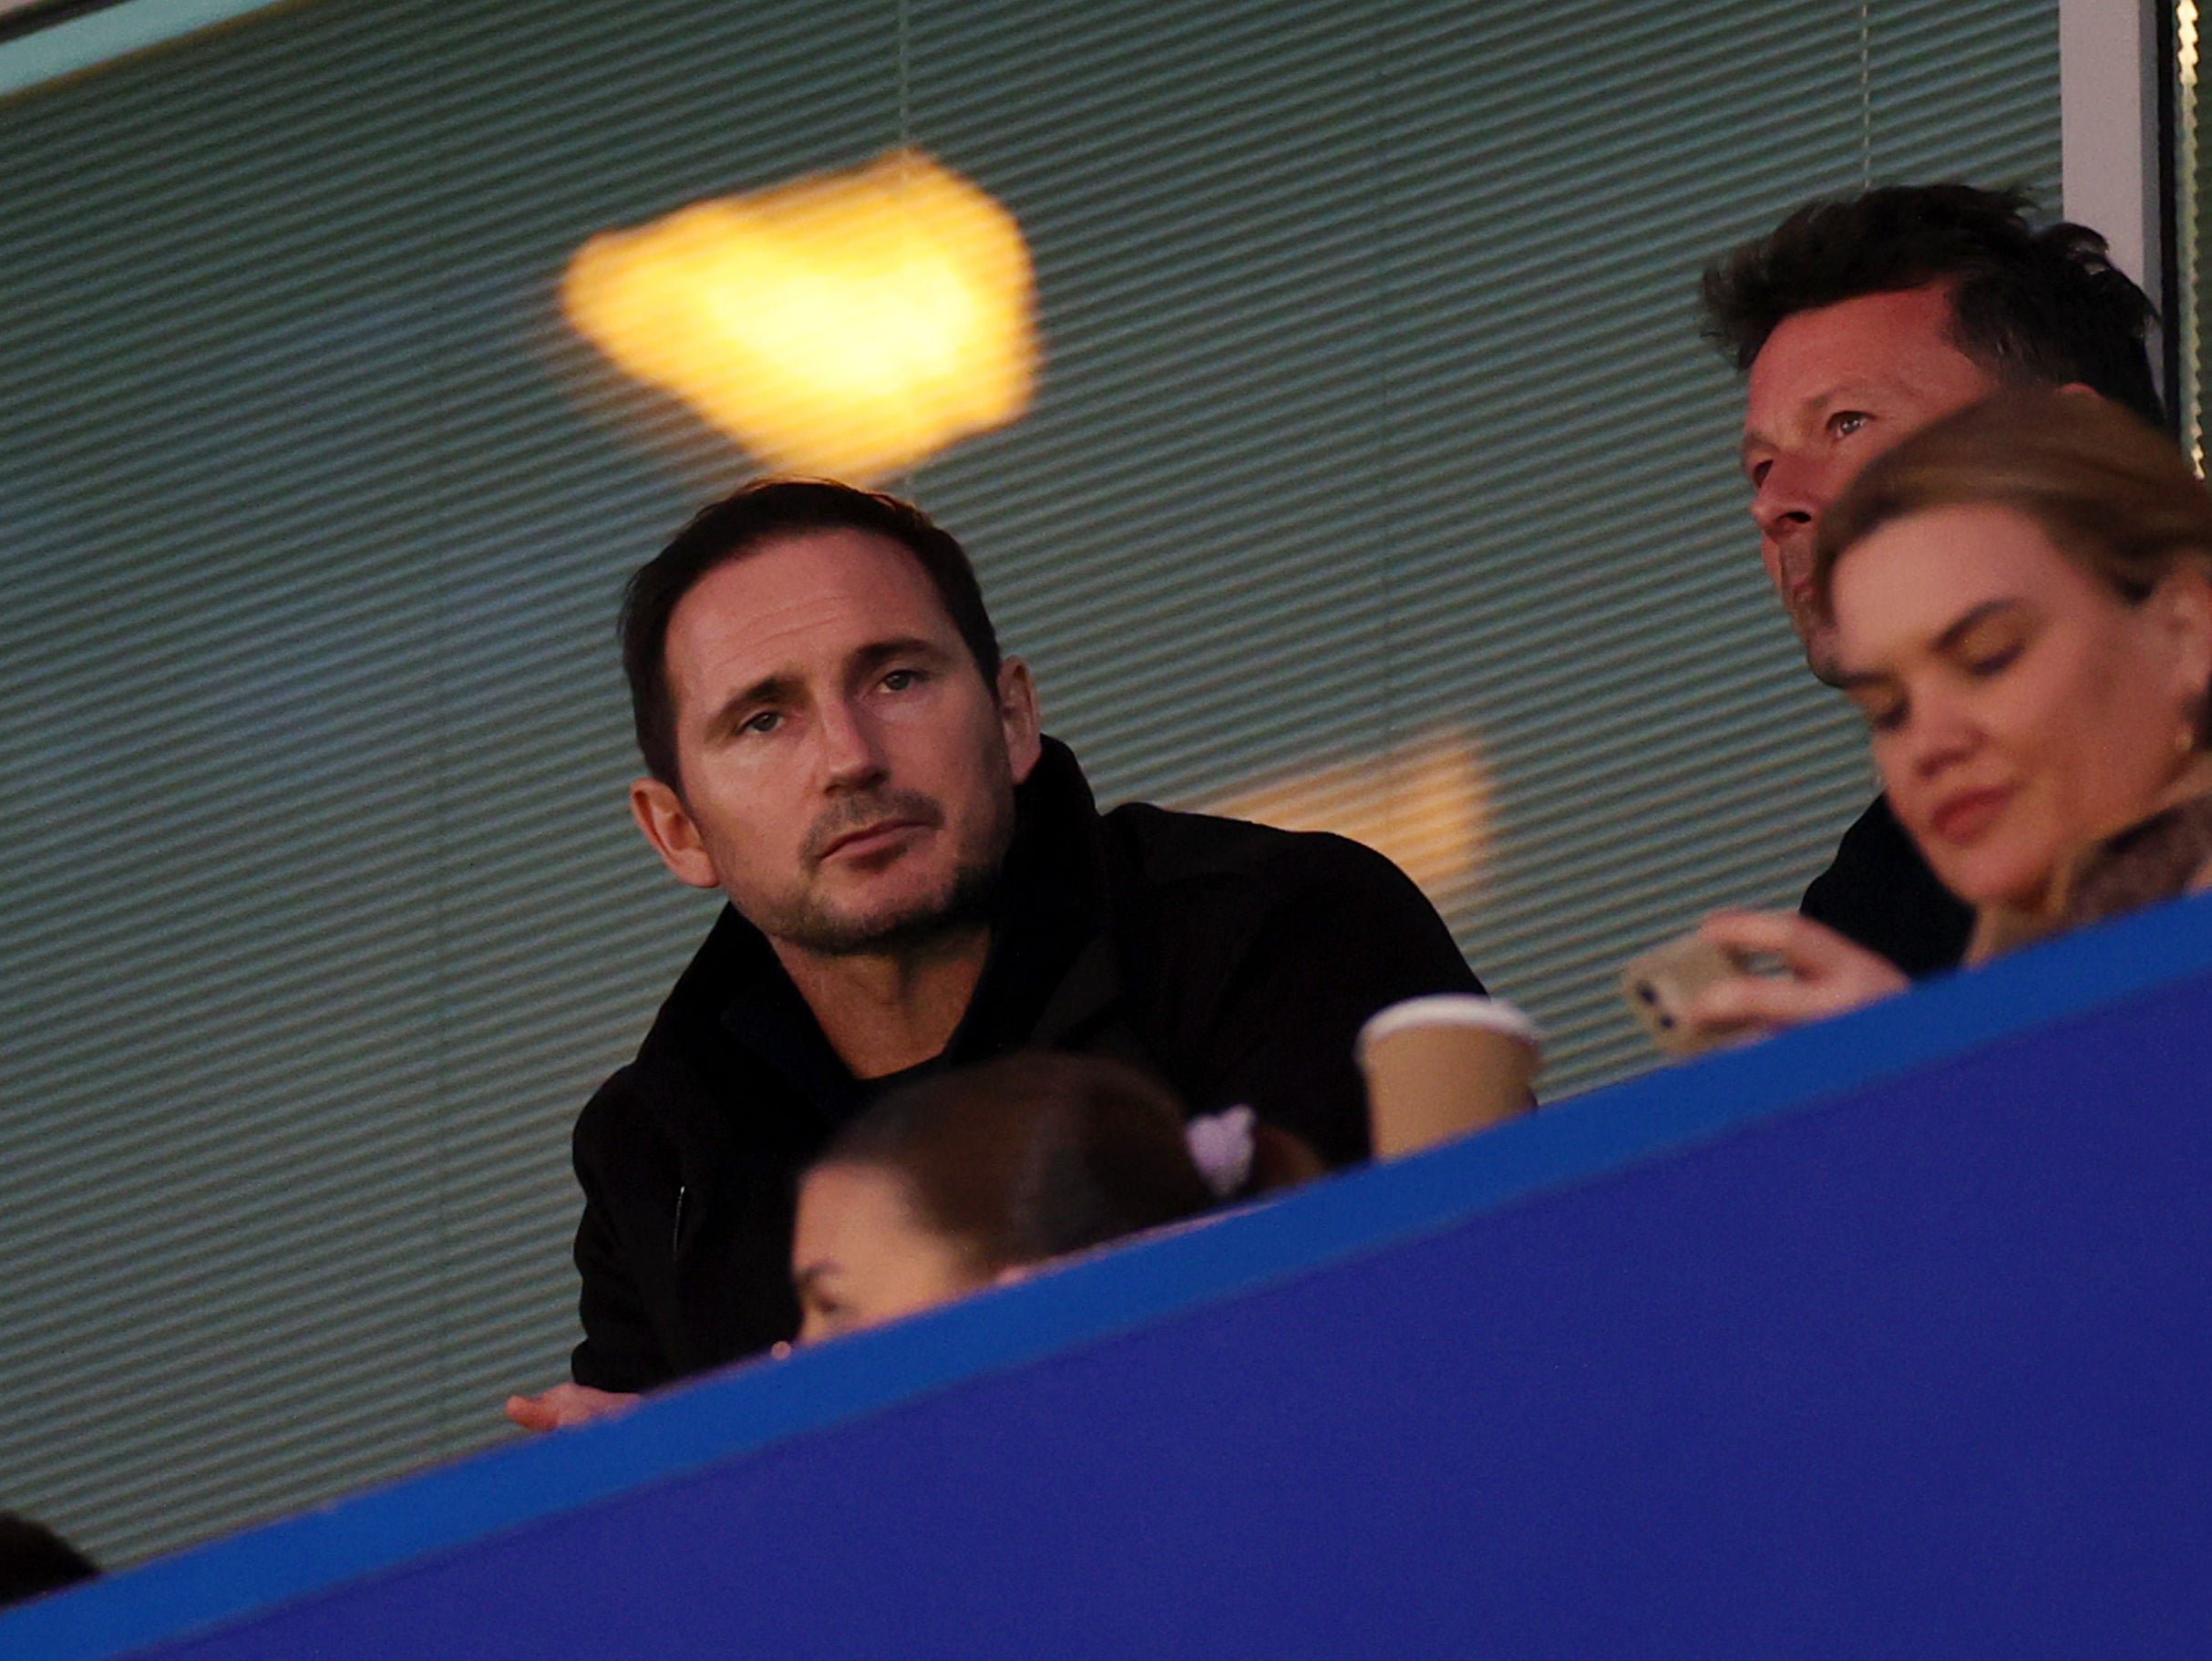 Frank Lampard looks on from the stands at Chelsea vs Liverpool